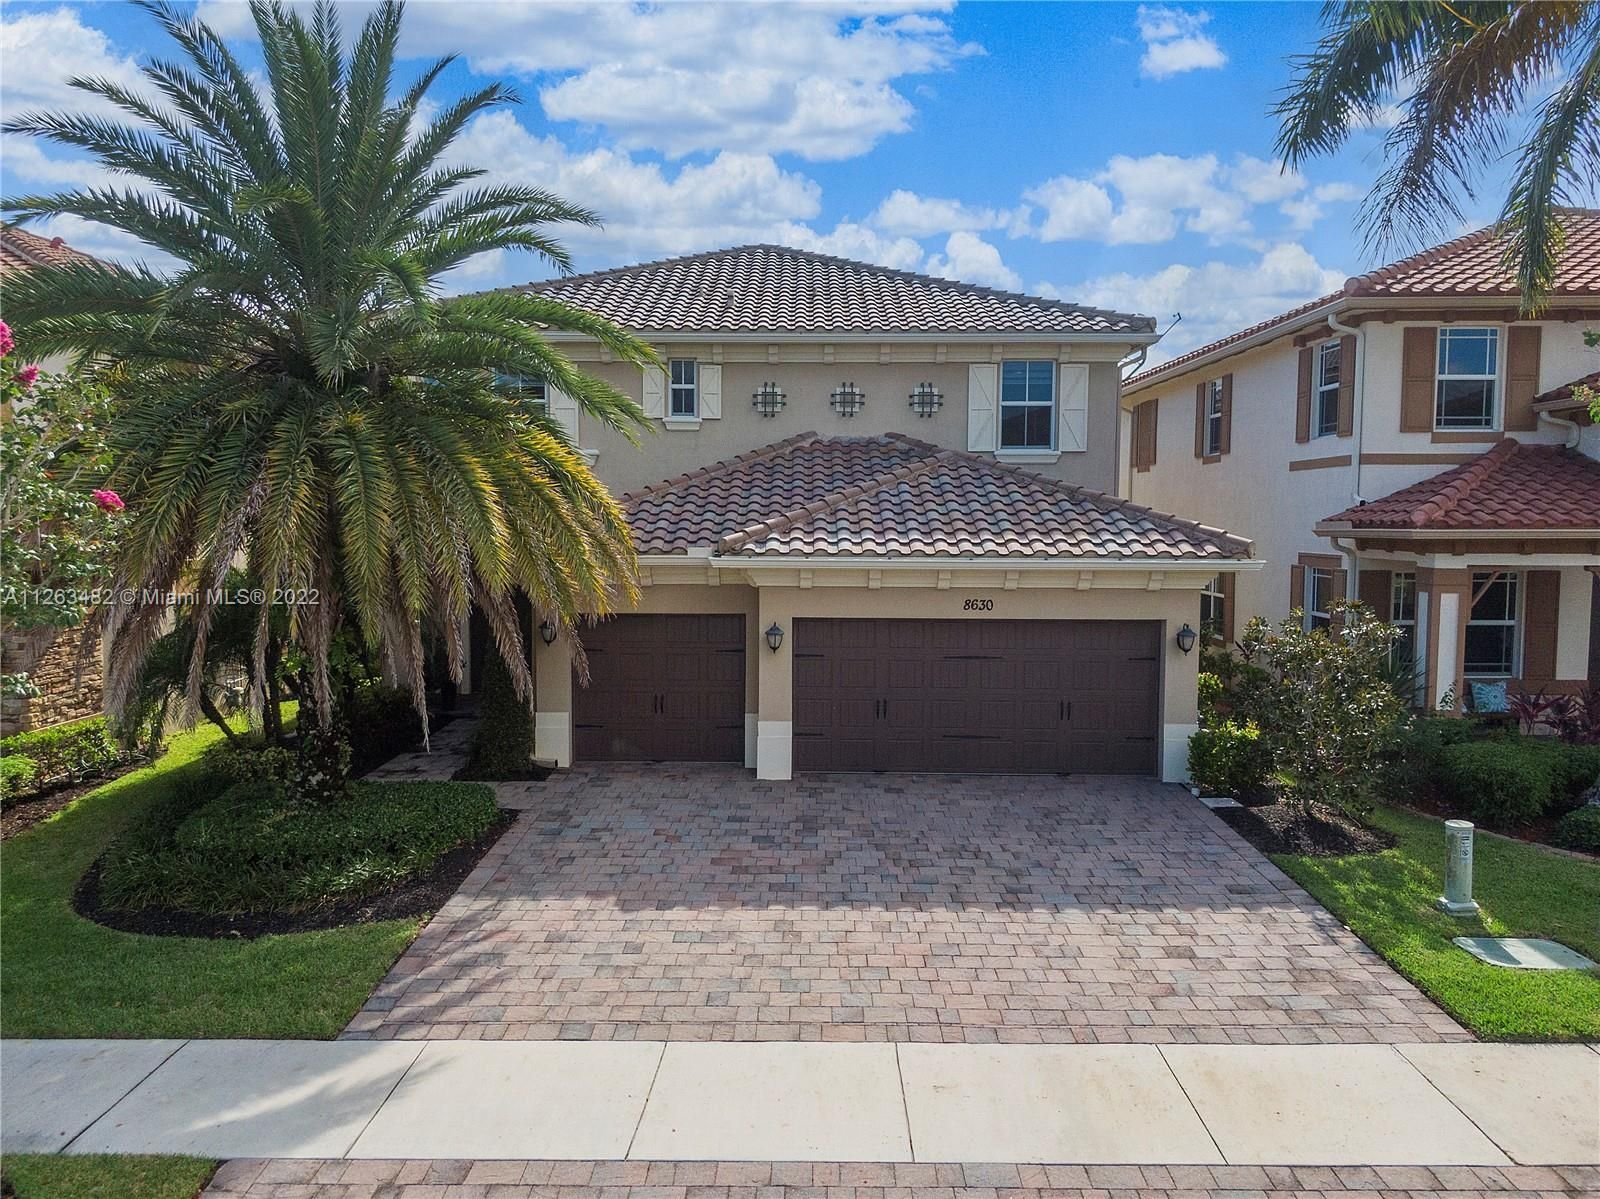 Real estate property located at 8630 Waterside Ct, Broward County, Parkland, FL